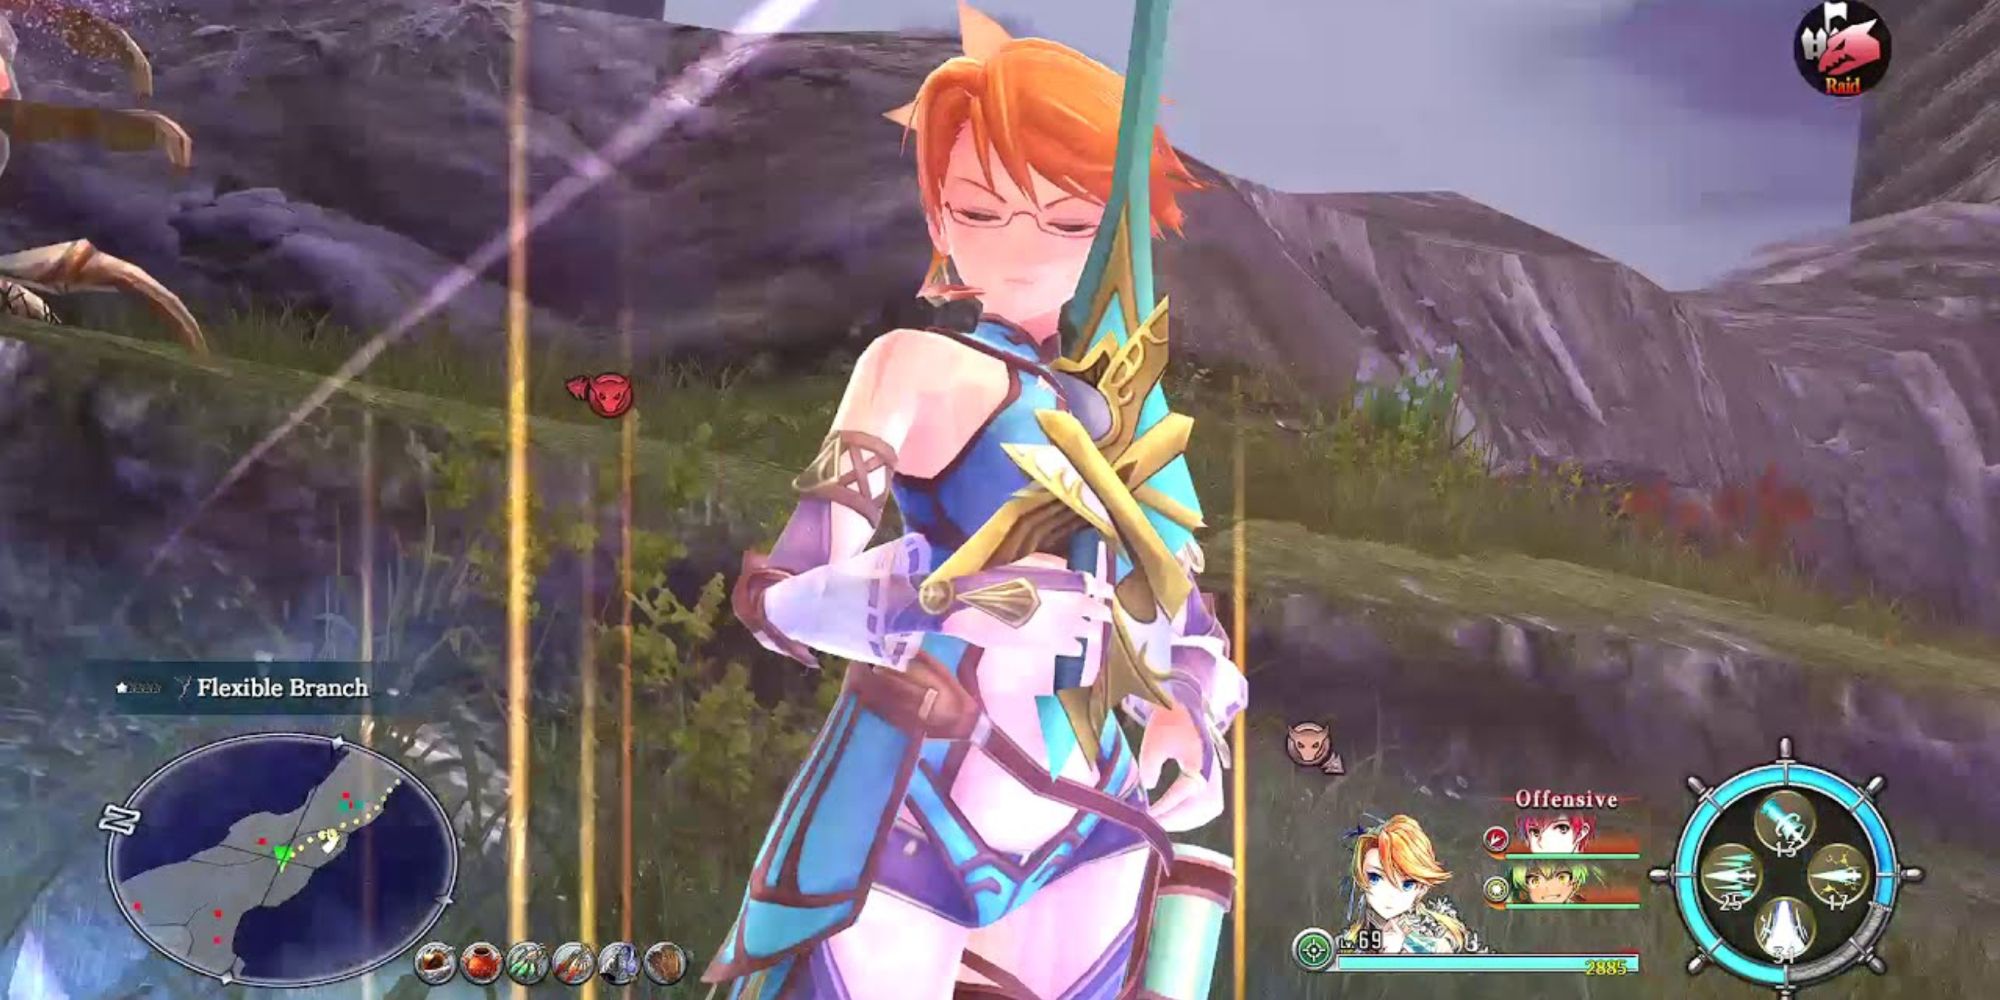 Laxia performing her EXTRA Skill in Ys 8: Lacrimosa of Dana